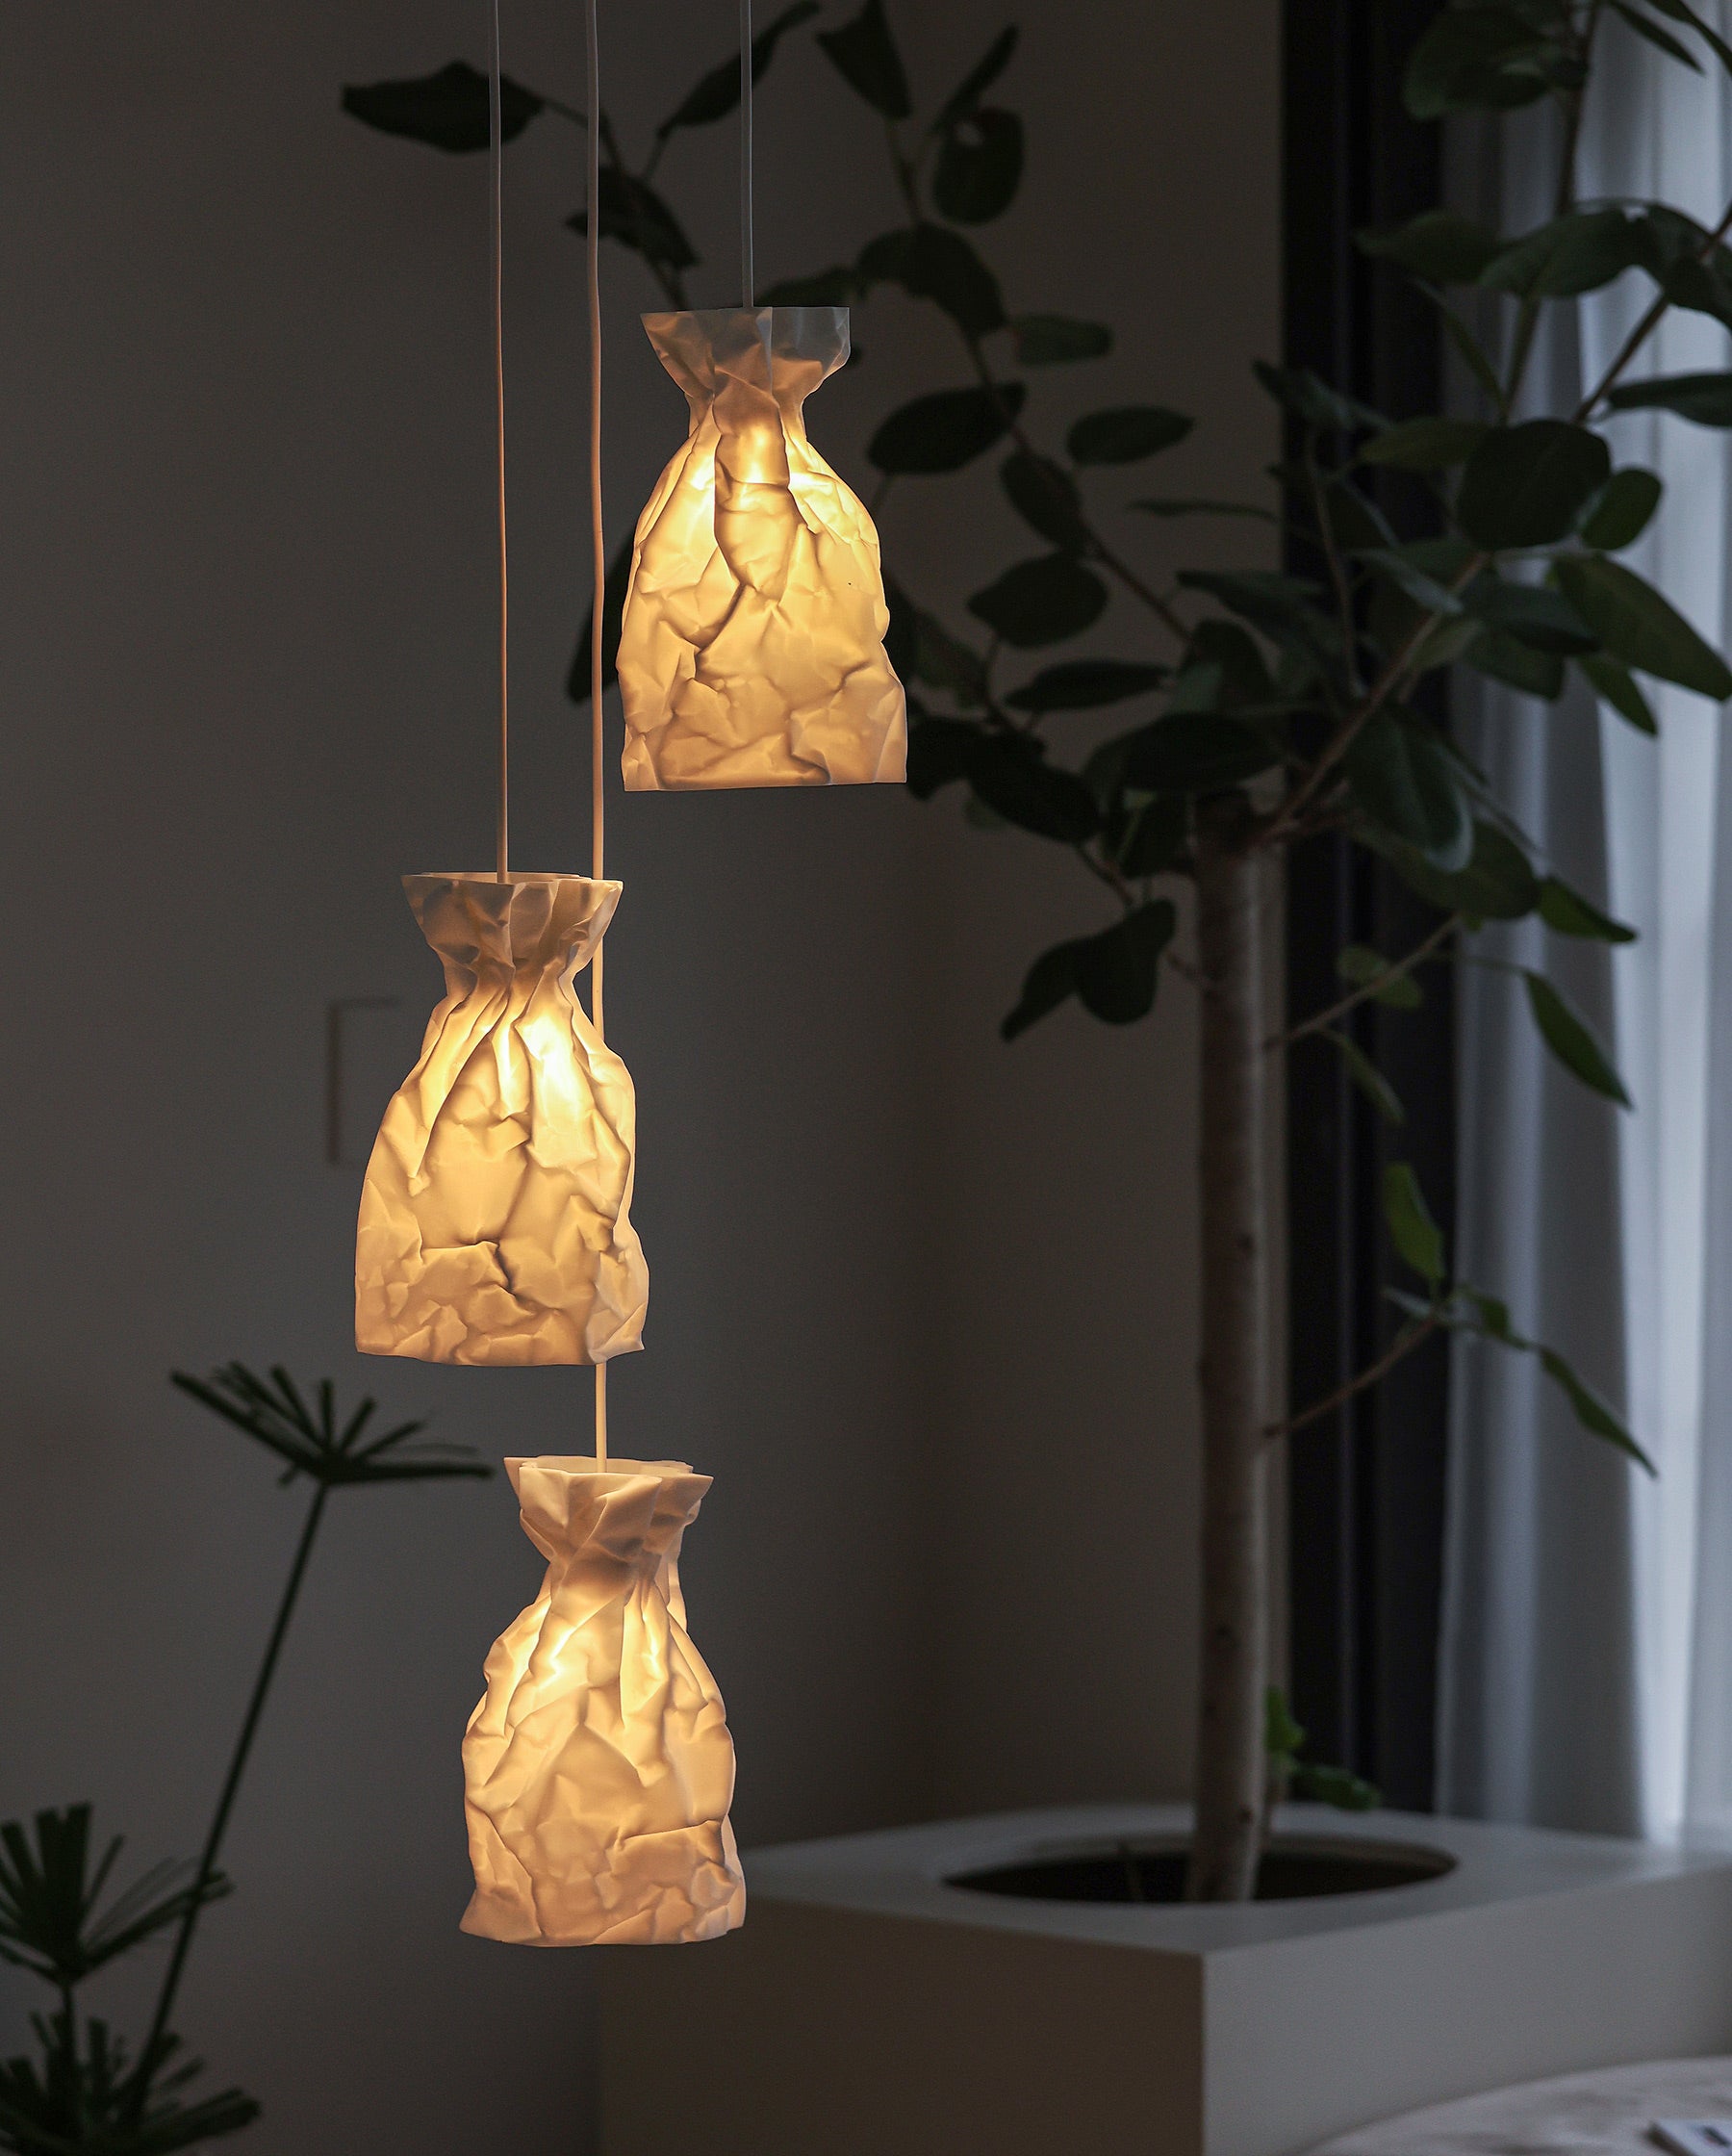 A Pendant Lamp of wrinkle & crinkle paper that echoes of shadow & balance